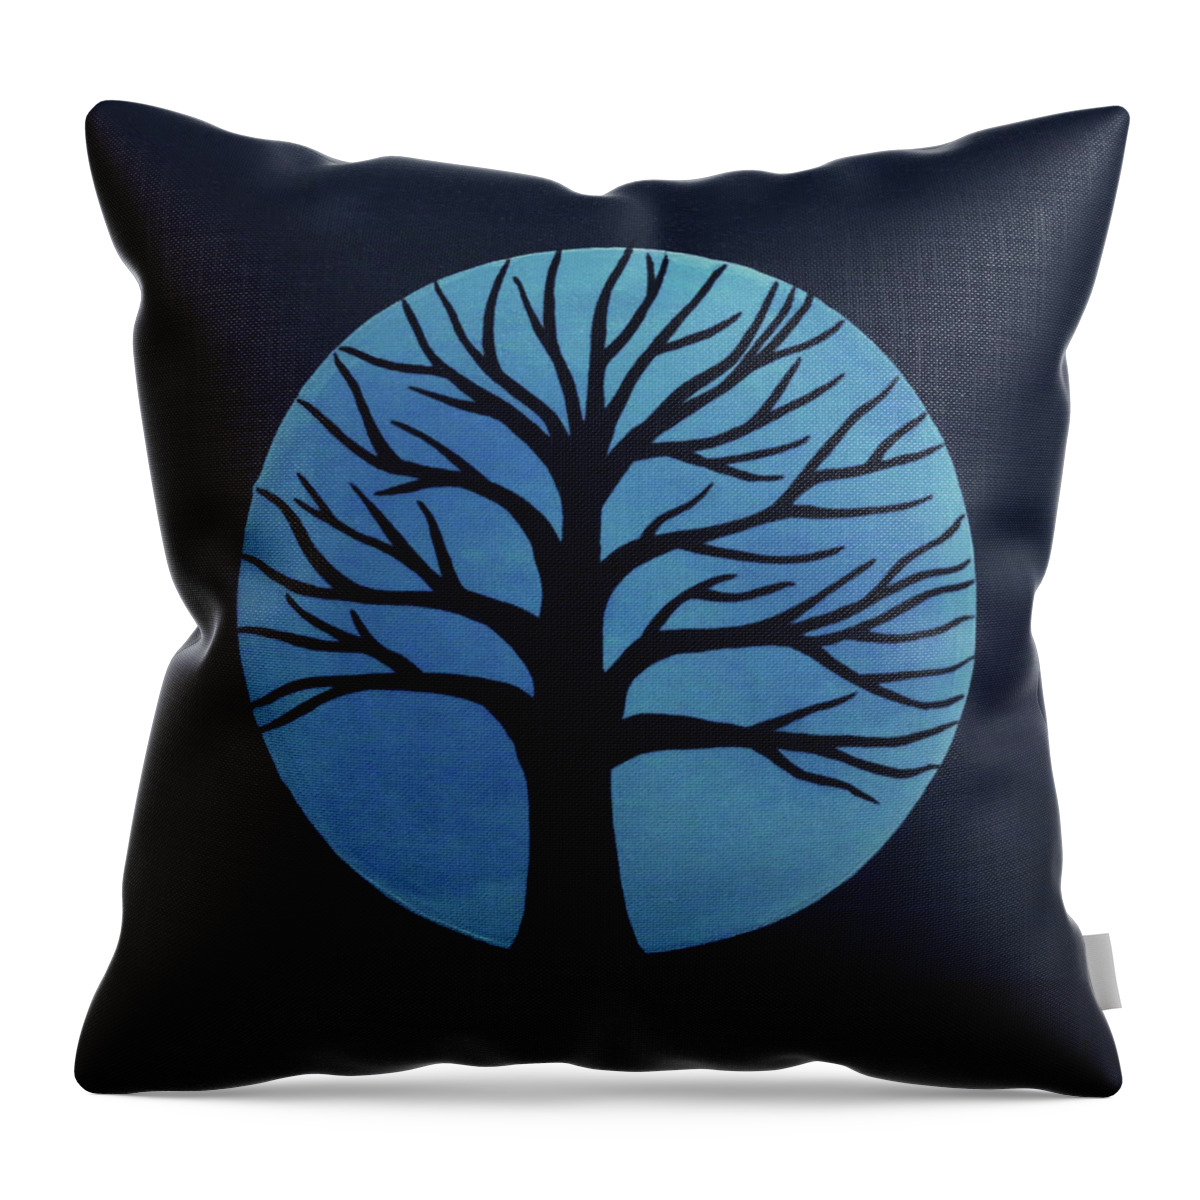 Spooky Throw Pillow featuring the painting Spooky Tree Blue by Sarah Jean